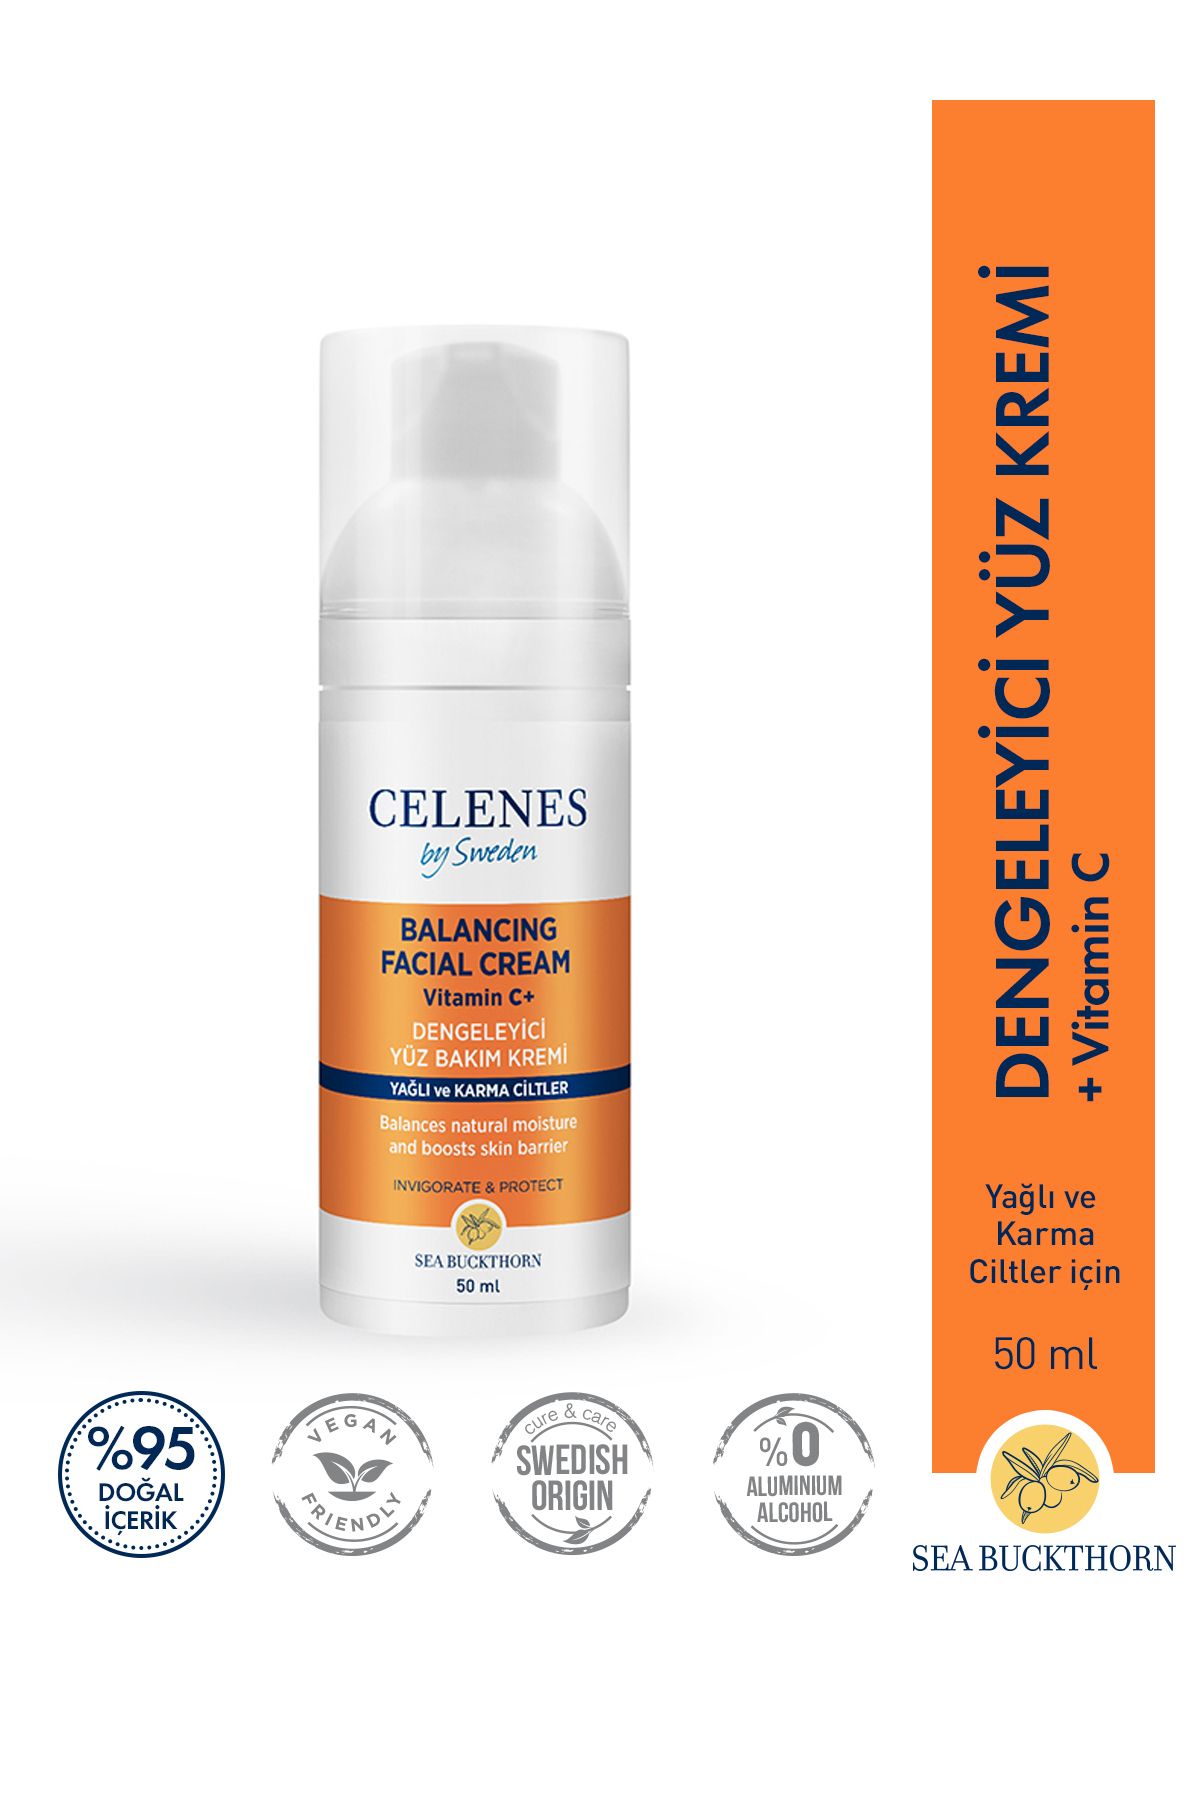 Celenes by Sweden SEA BUCKTHORN BALANCİNG FACE CREAM 50ml FOR OİLY SKİN AND COMBİNATİON SKİN GKÜRN913